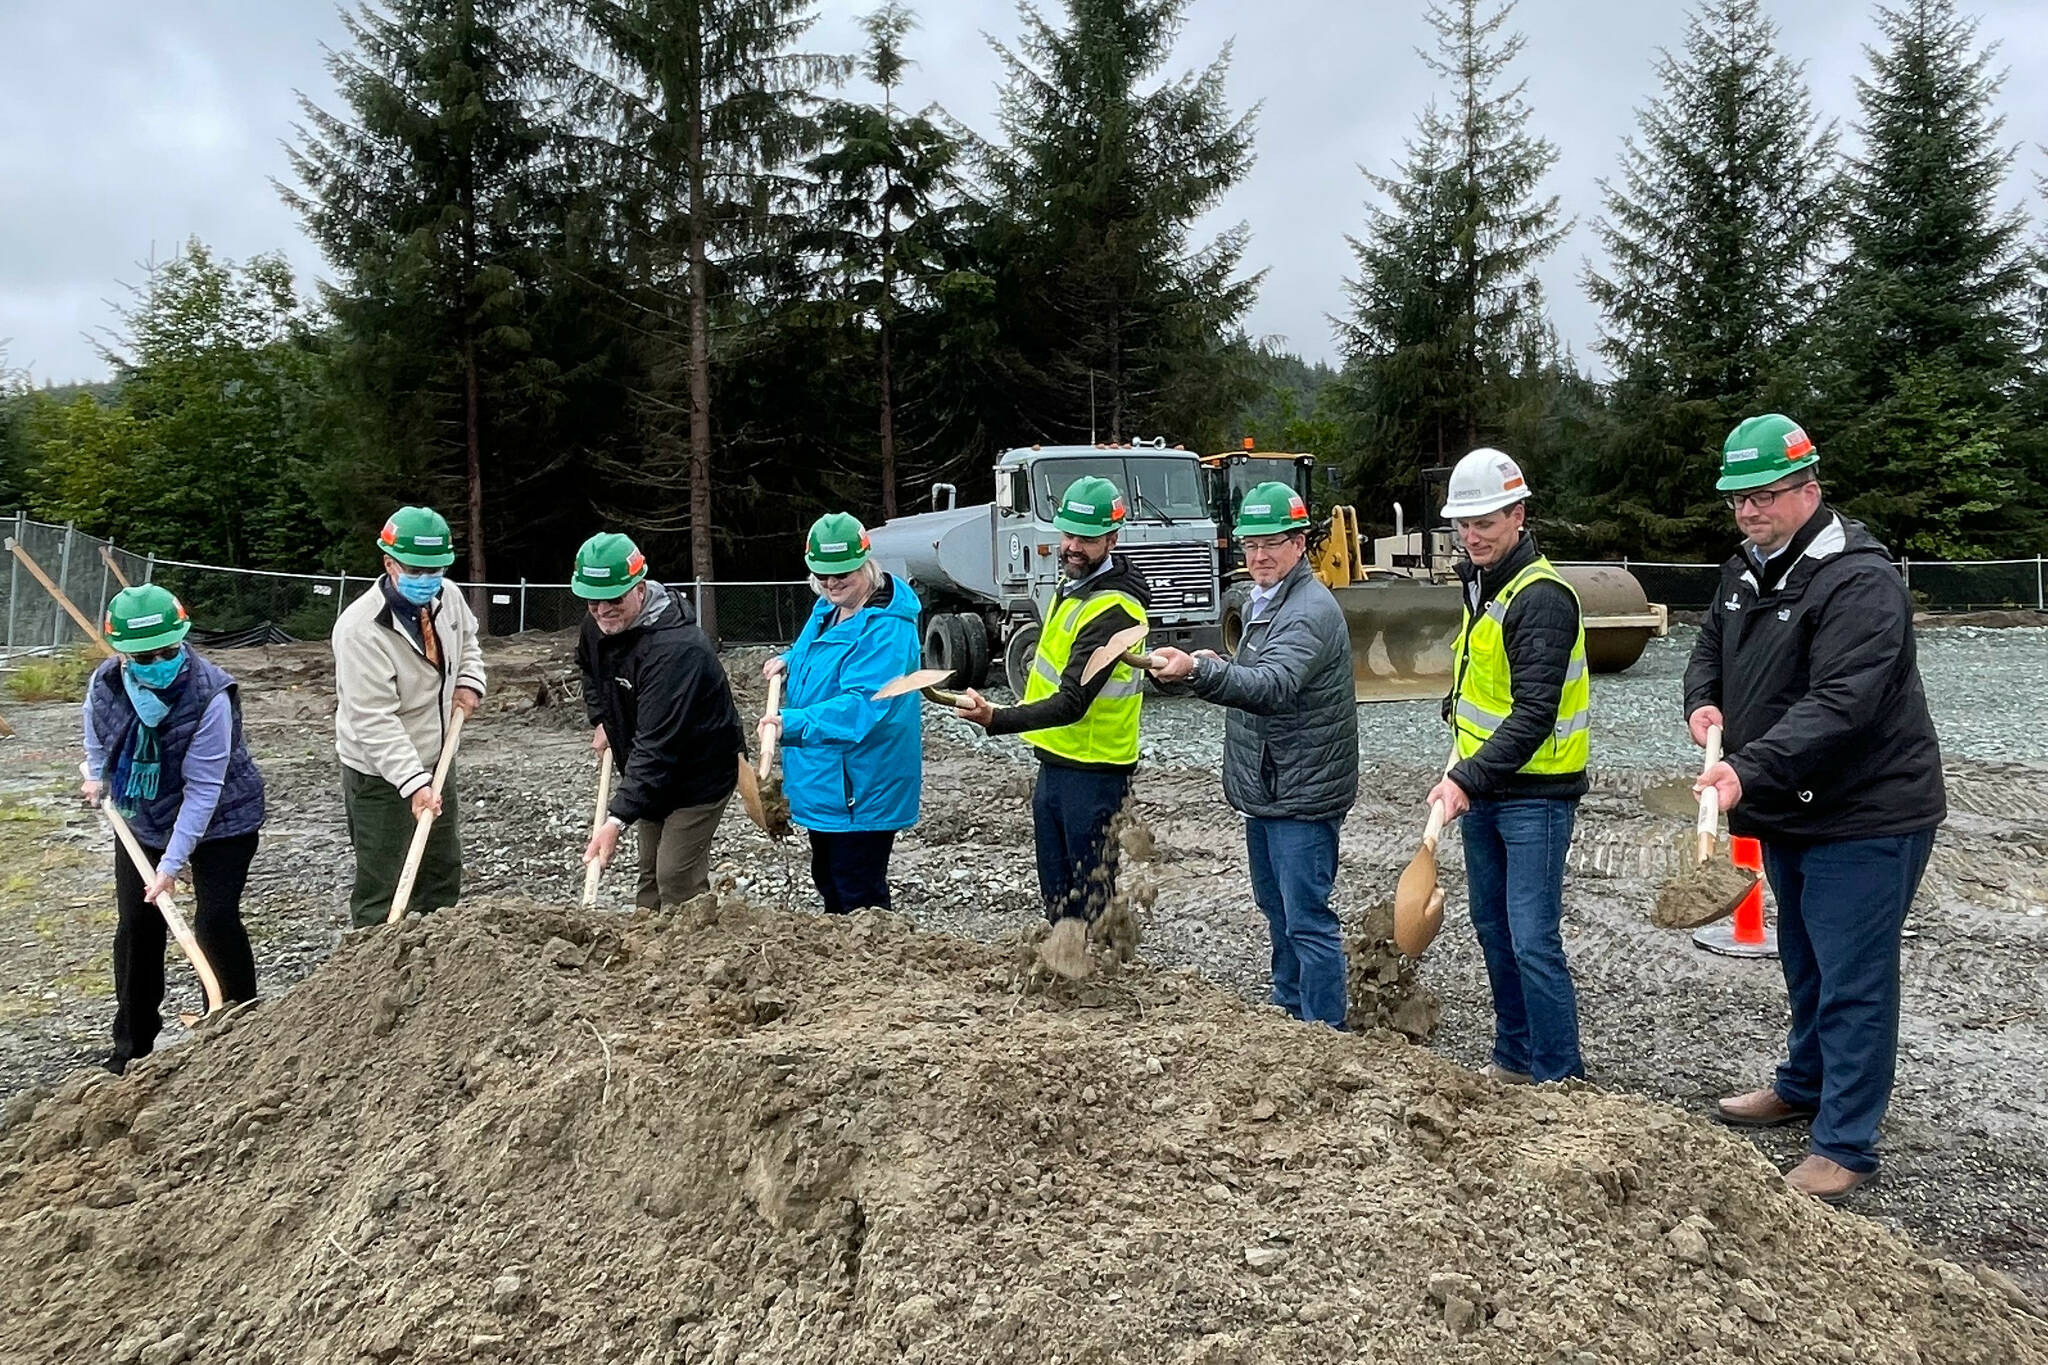 City officials and commercial entities broke ceremonial ground for the Riverview Senior Living community near Vintage Boulevard on Sept. 8, 2021. (Michael S. Lockett / Juneau Empire)